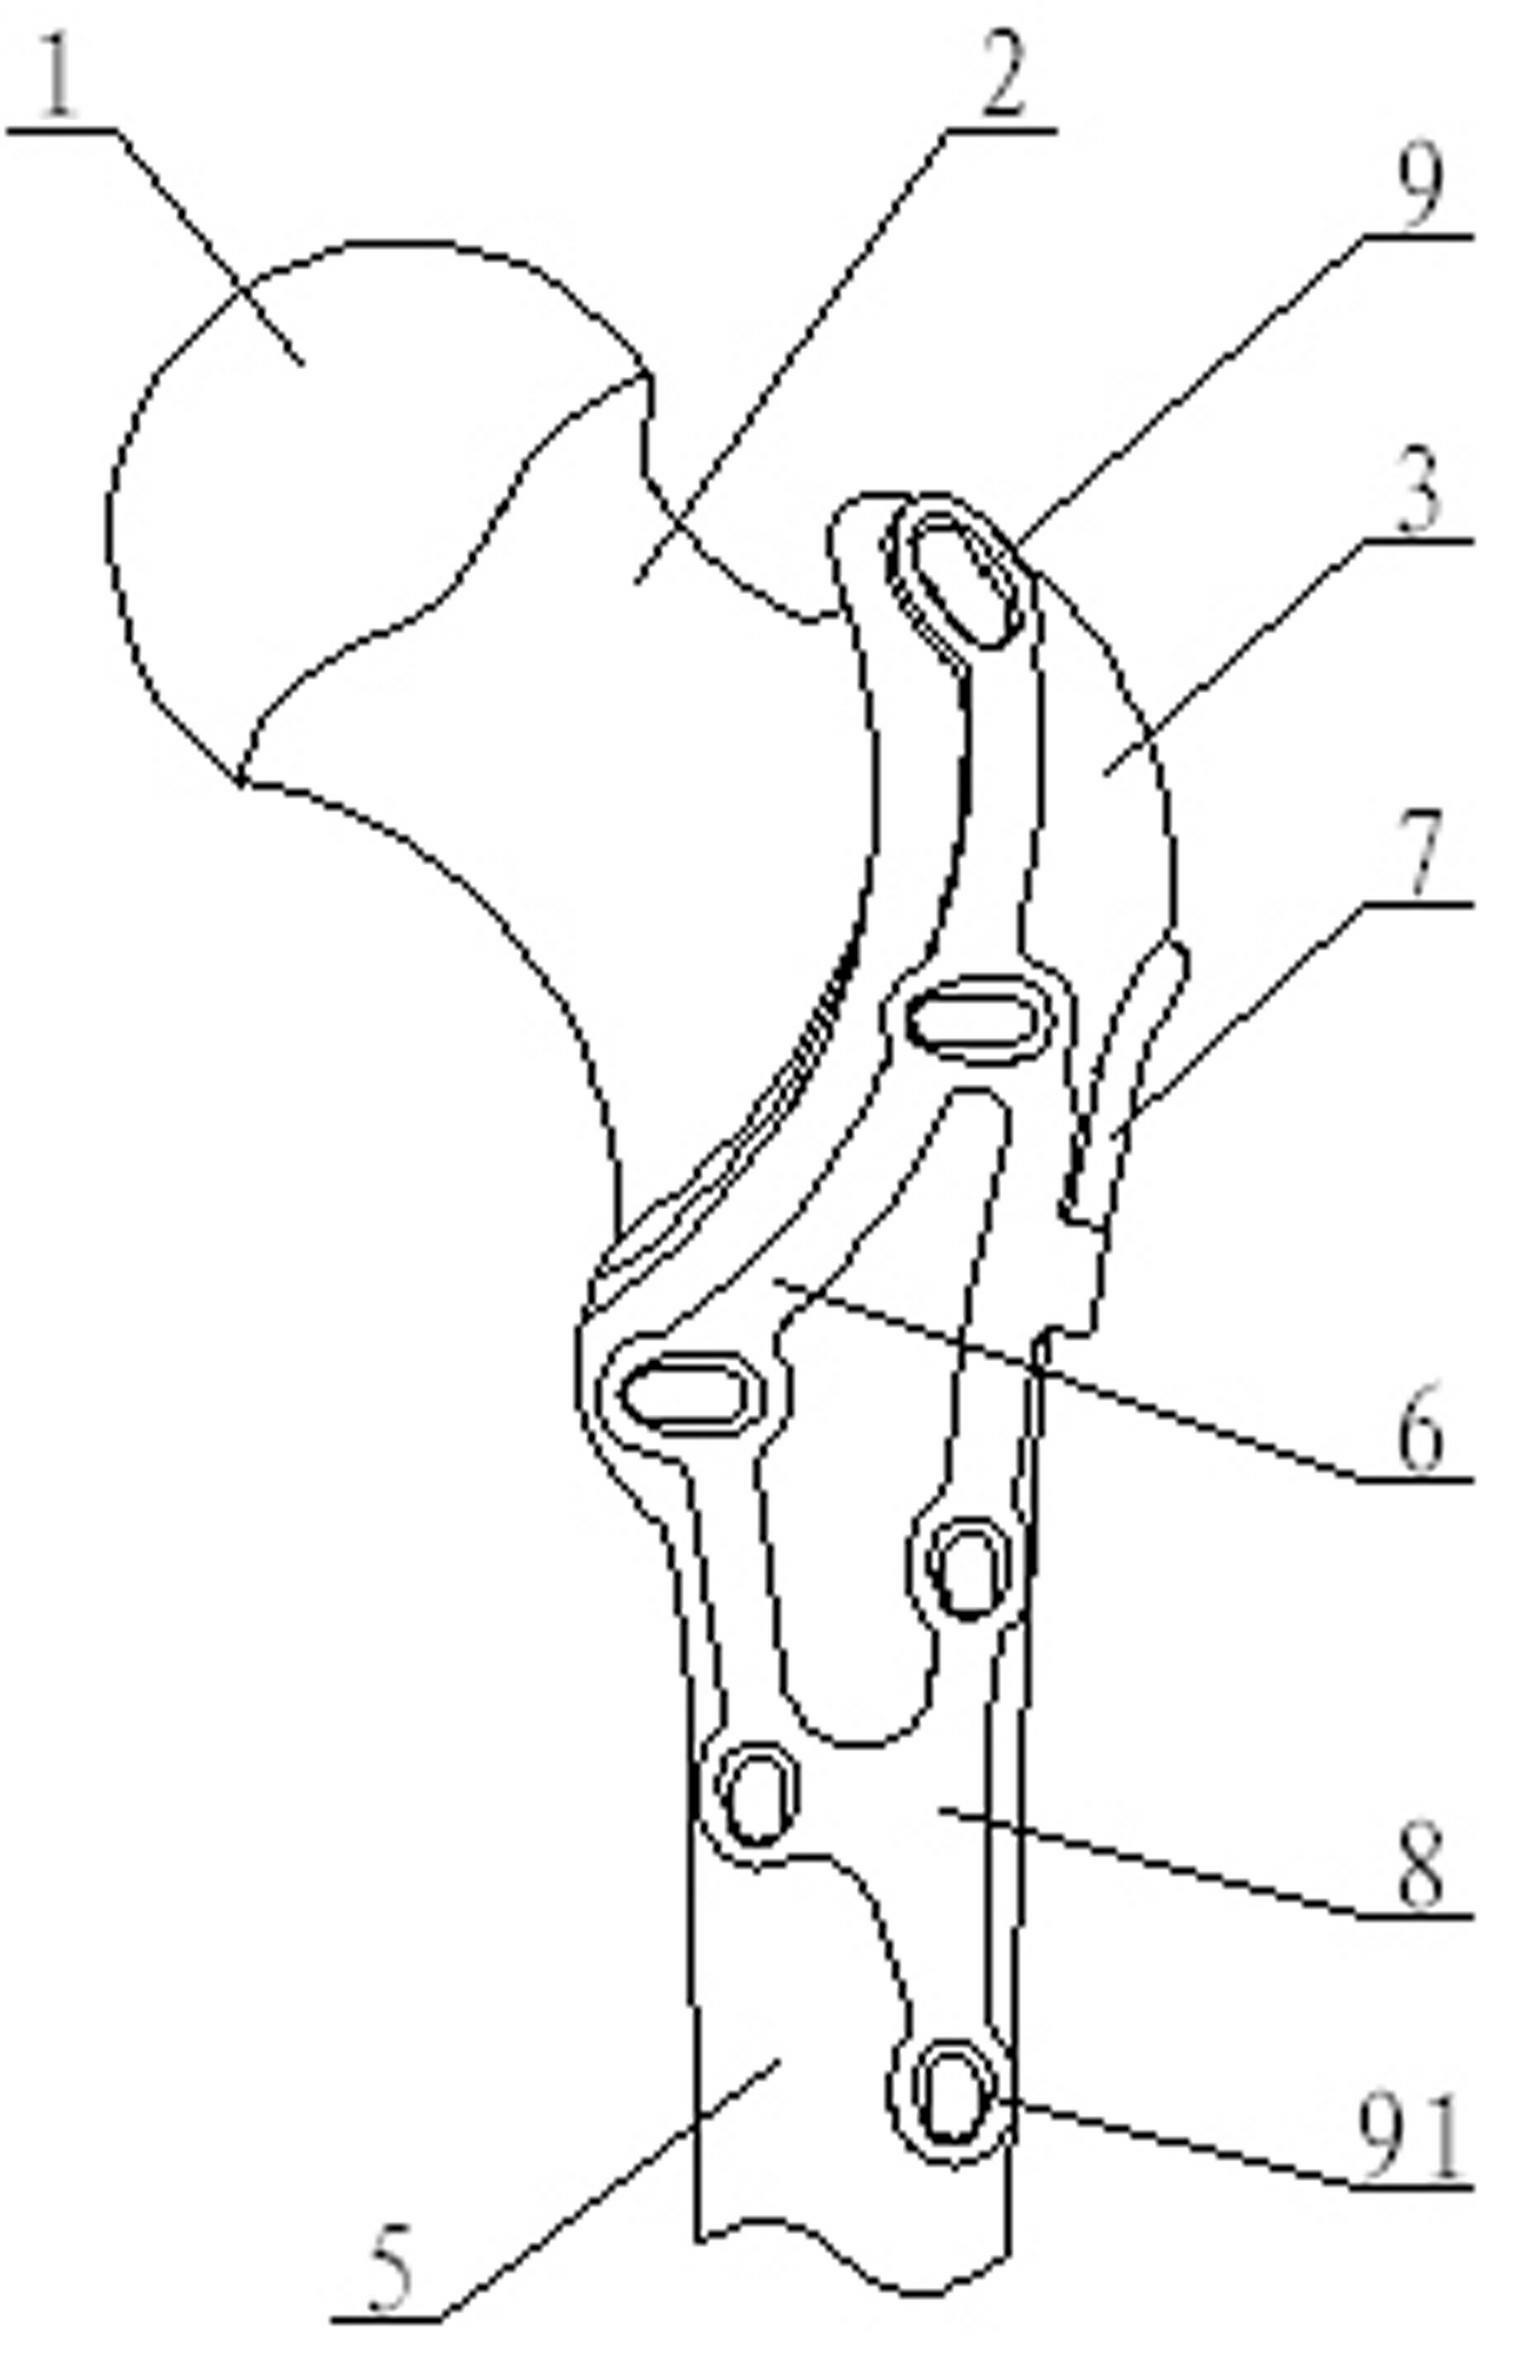 Minimal invasive combined pressurizing and locking bone fracture plate for trochanter comminuted fracture and femoral neck fracture